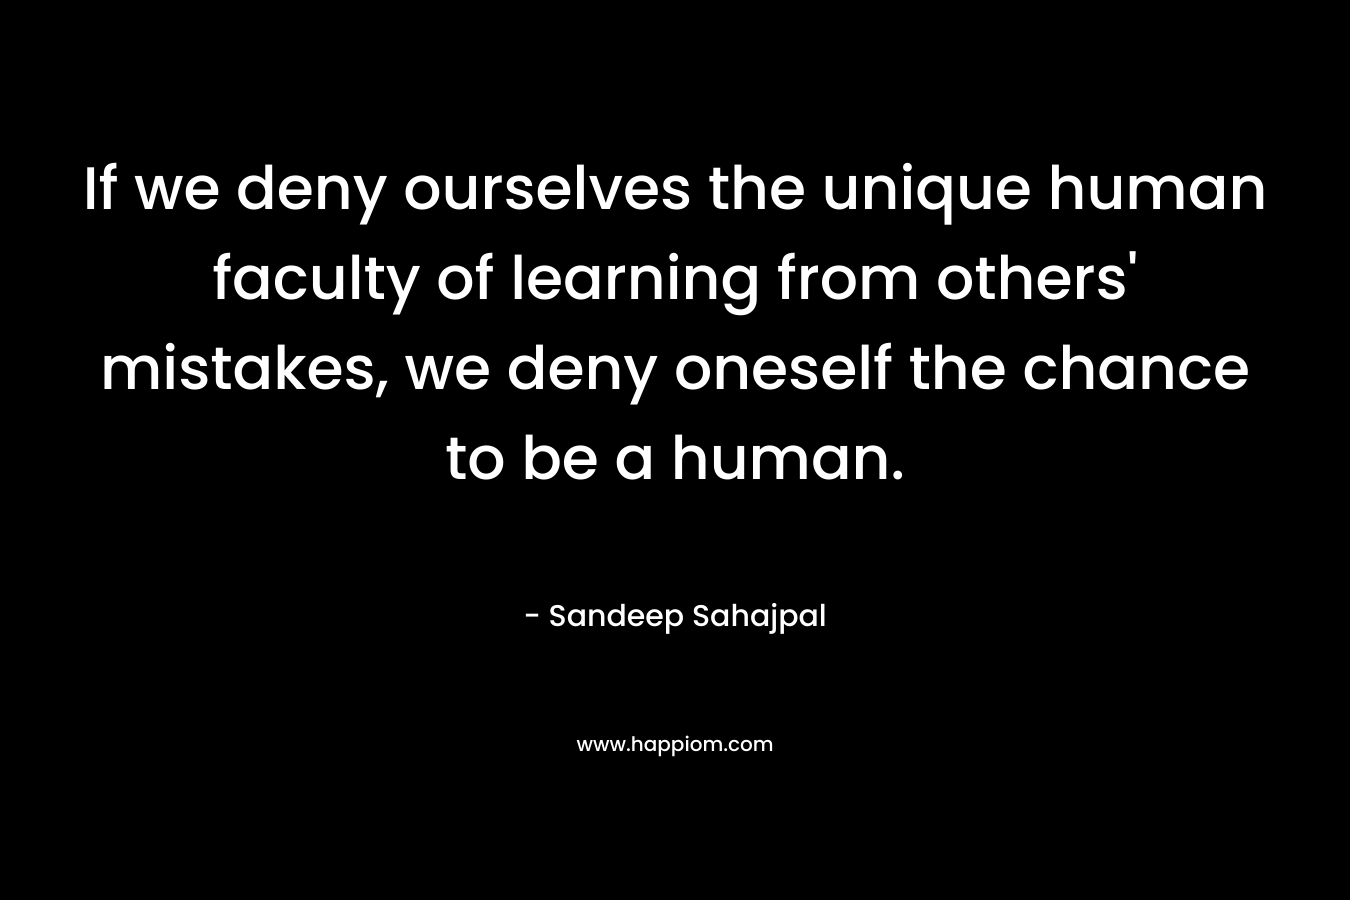 If we deny ourselves the unique human faculty of learning from others' mistakes, we deny oneself the chance to be a human.